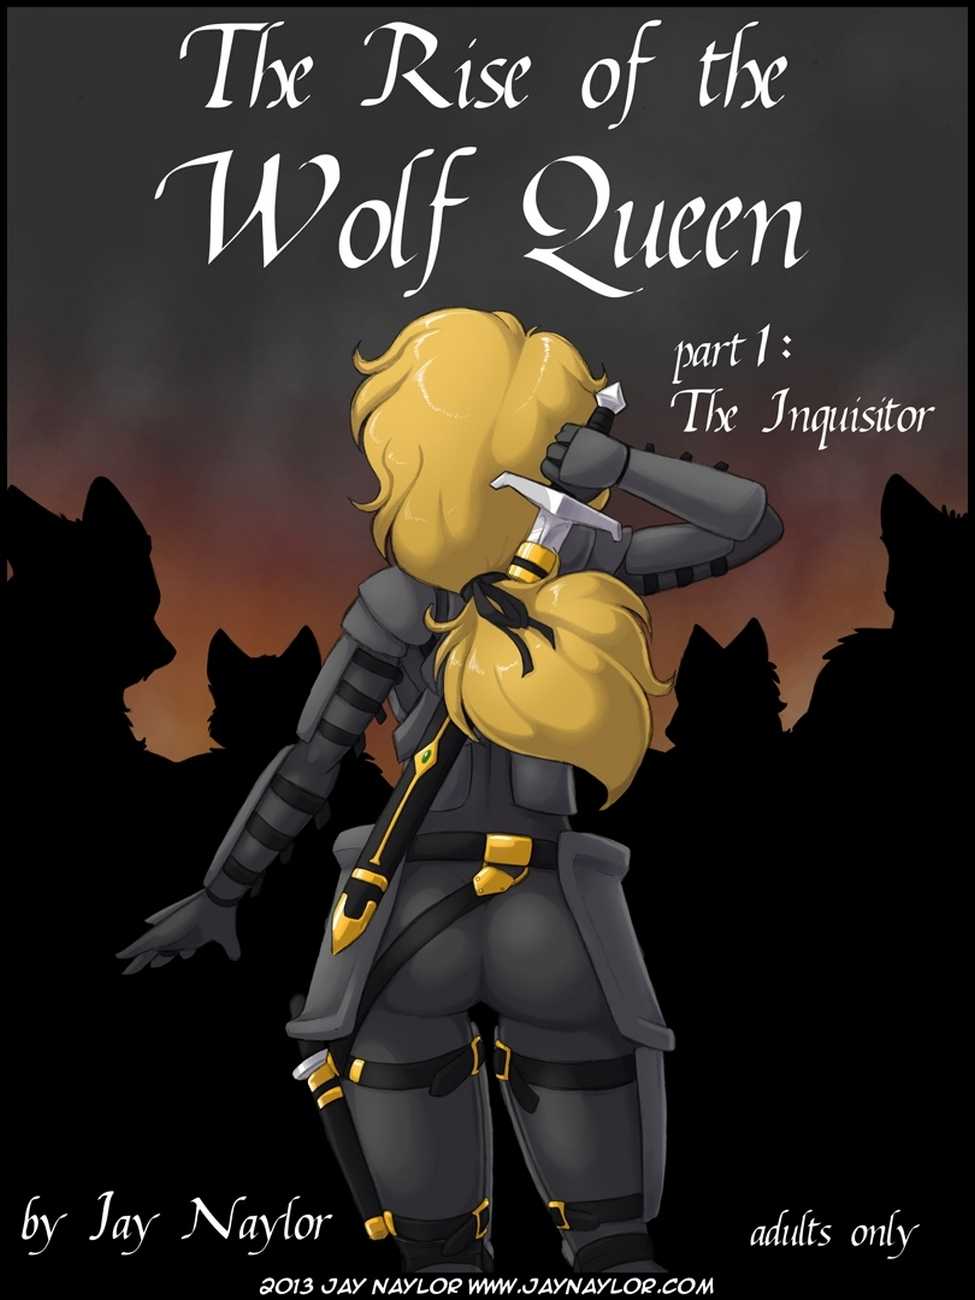 The Rise Of The Wolf Queen 1 - The Inquisitor page 1